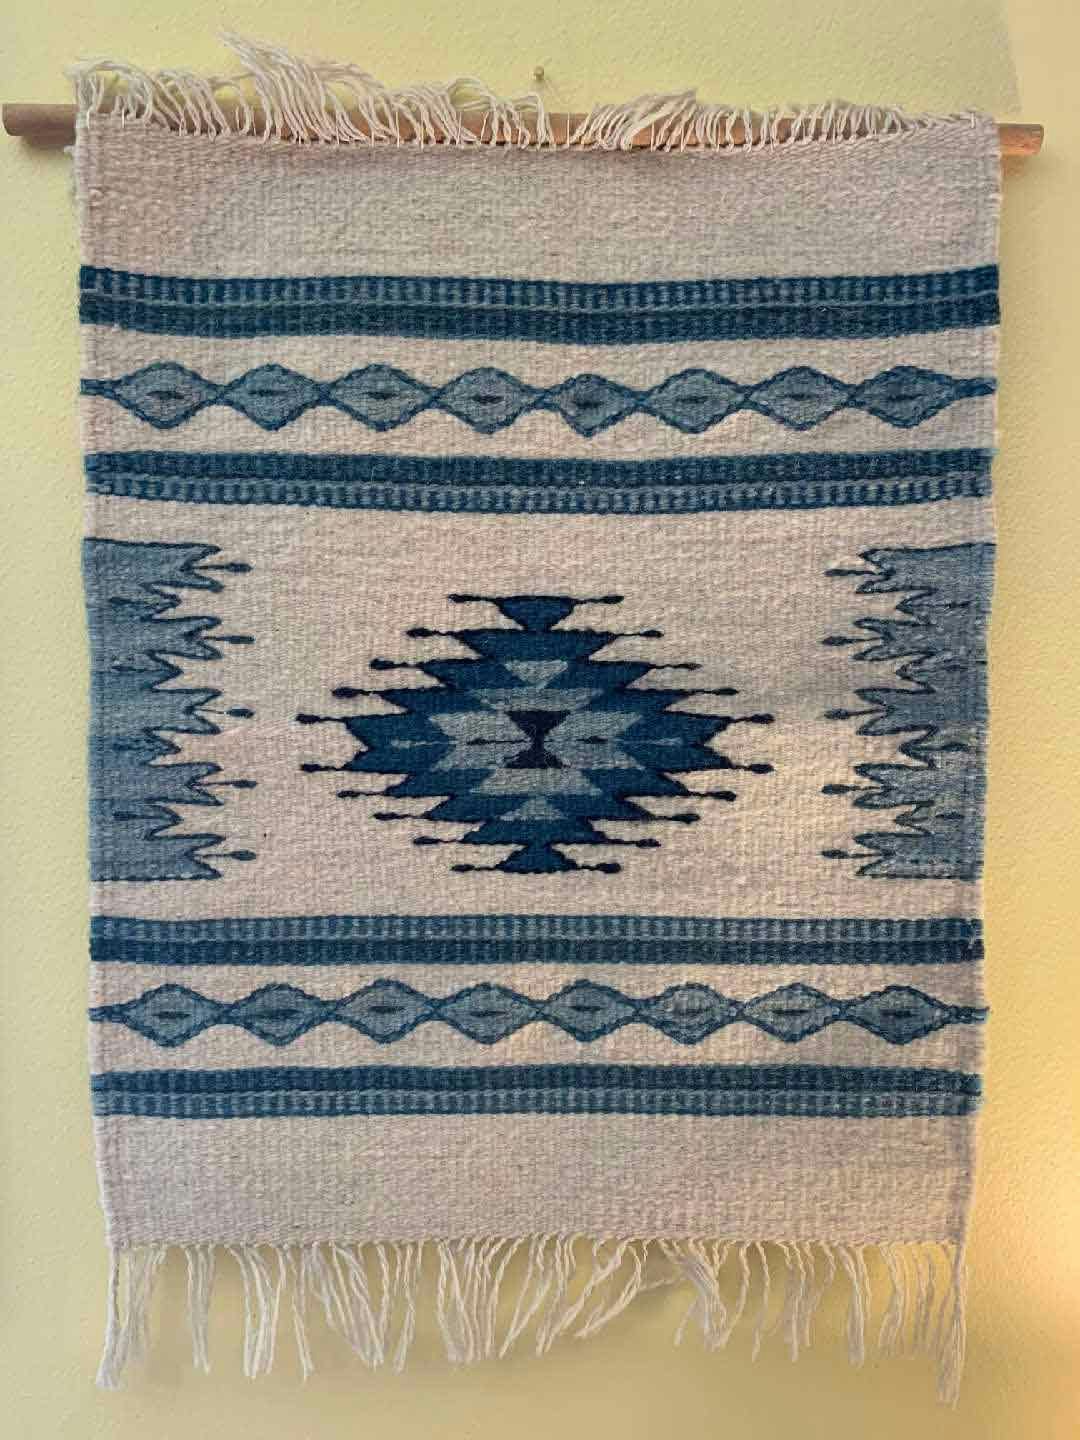 Small tapestry with dowel rod